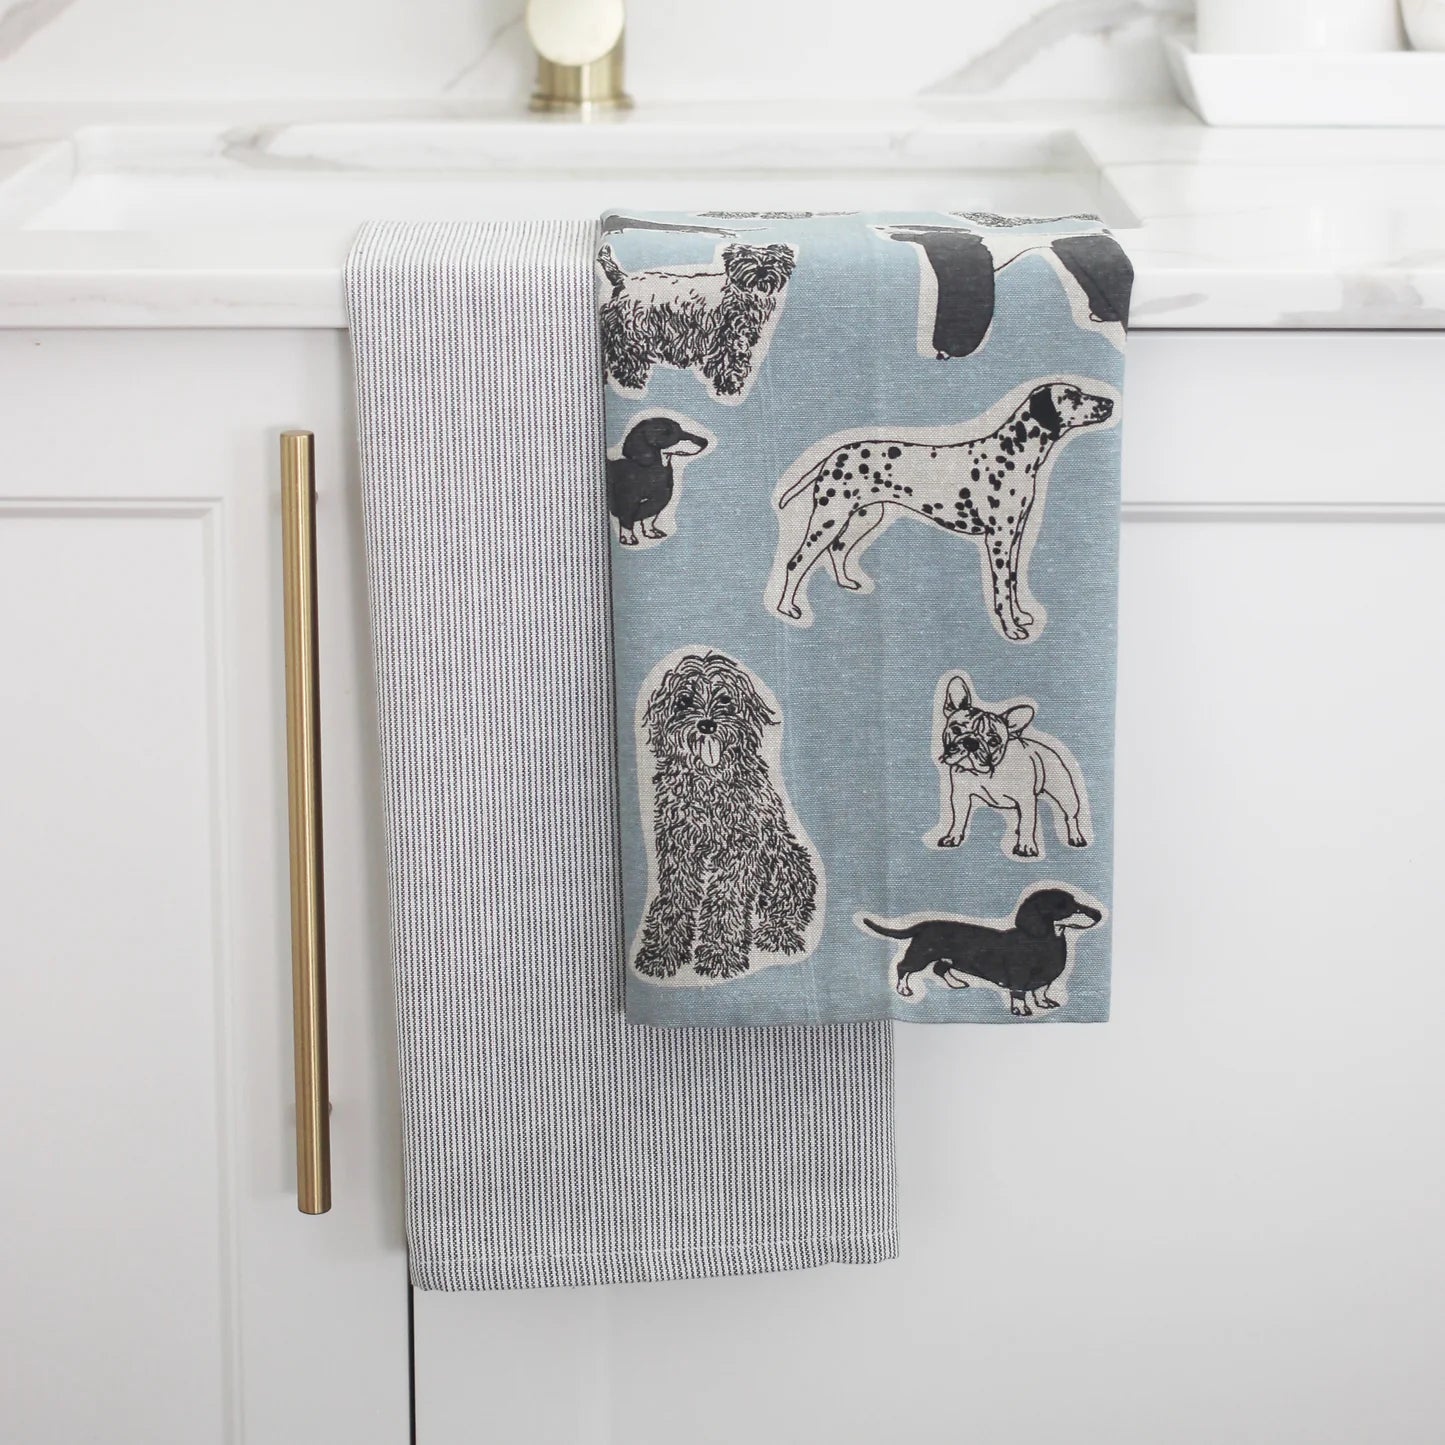 Crafted with care and eco-consciousness, these tea towels effortlessly blend style and functionality.